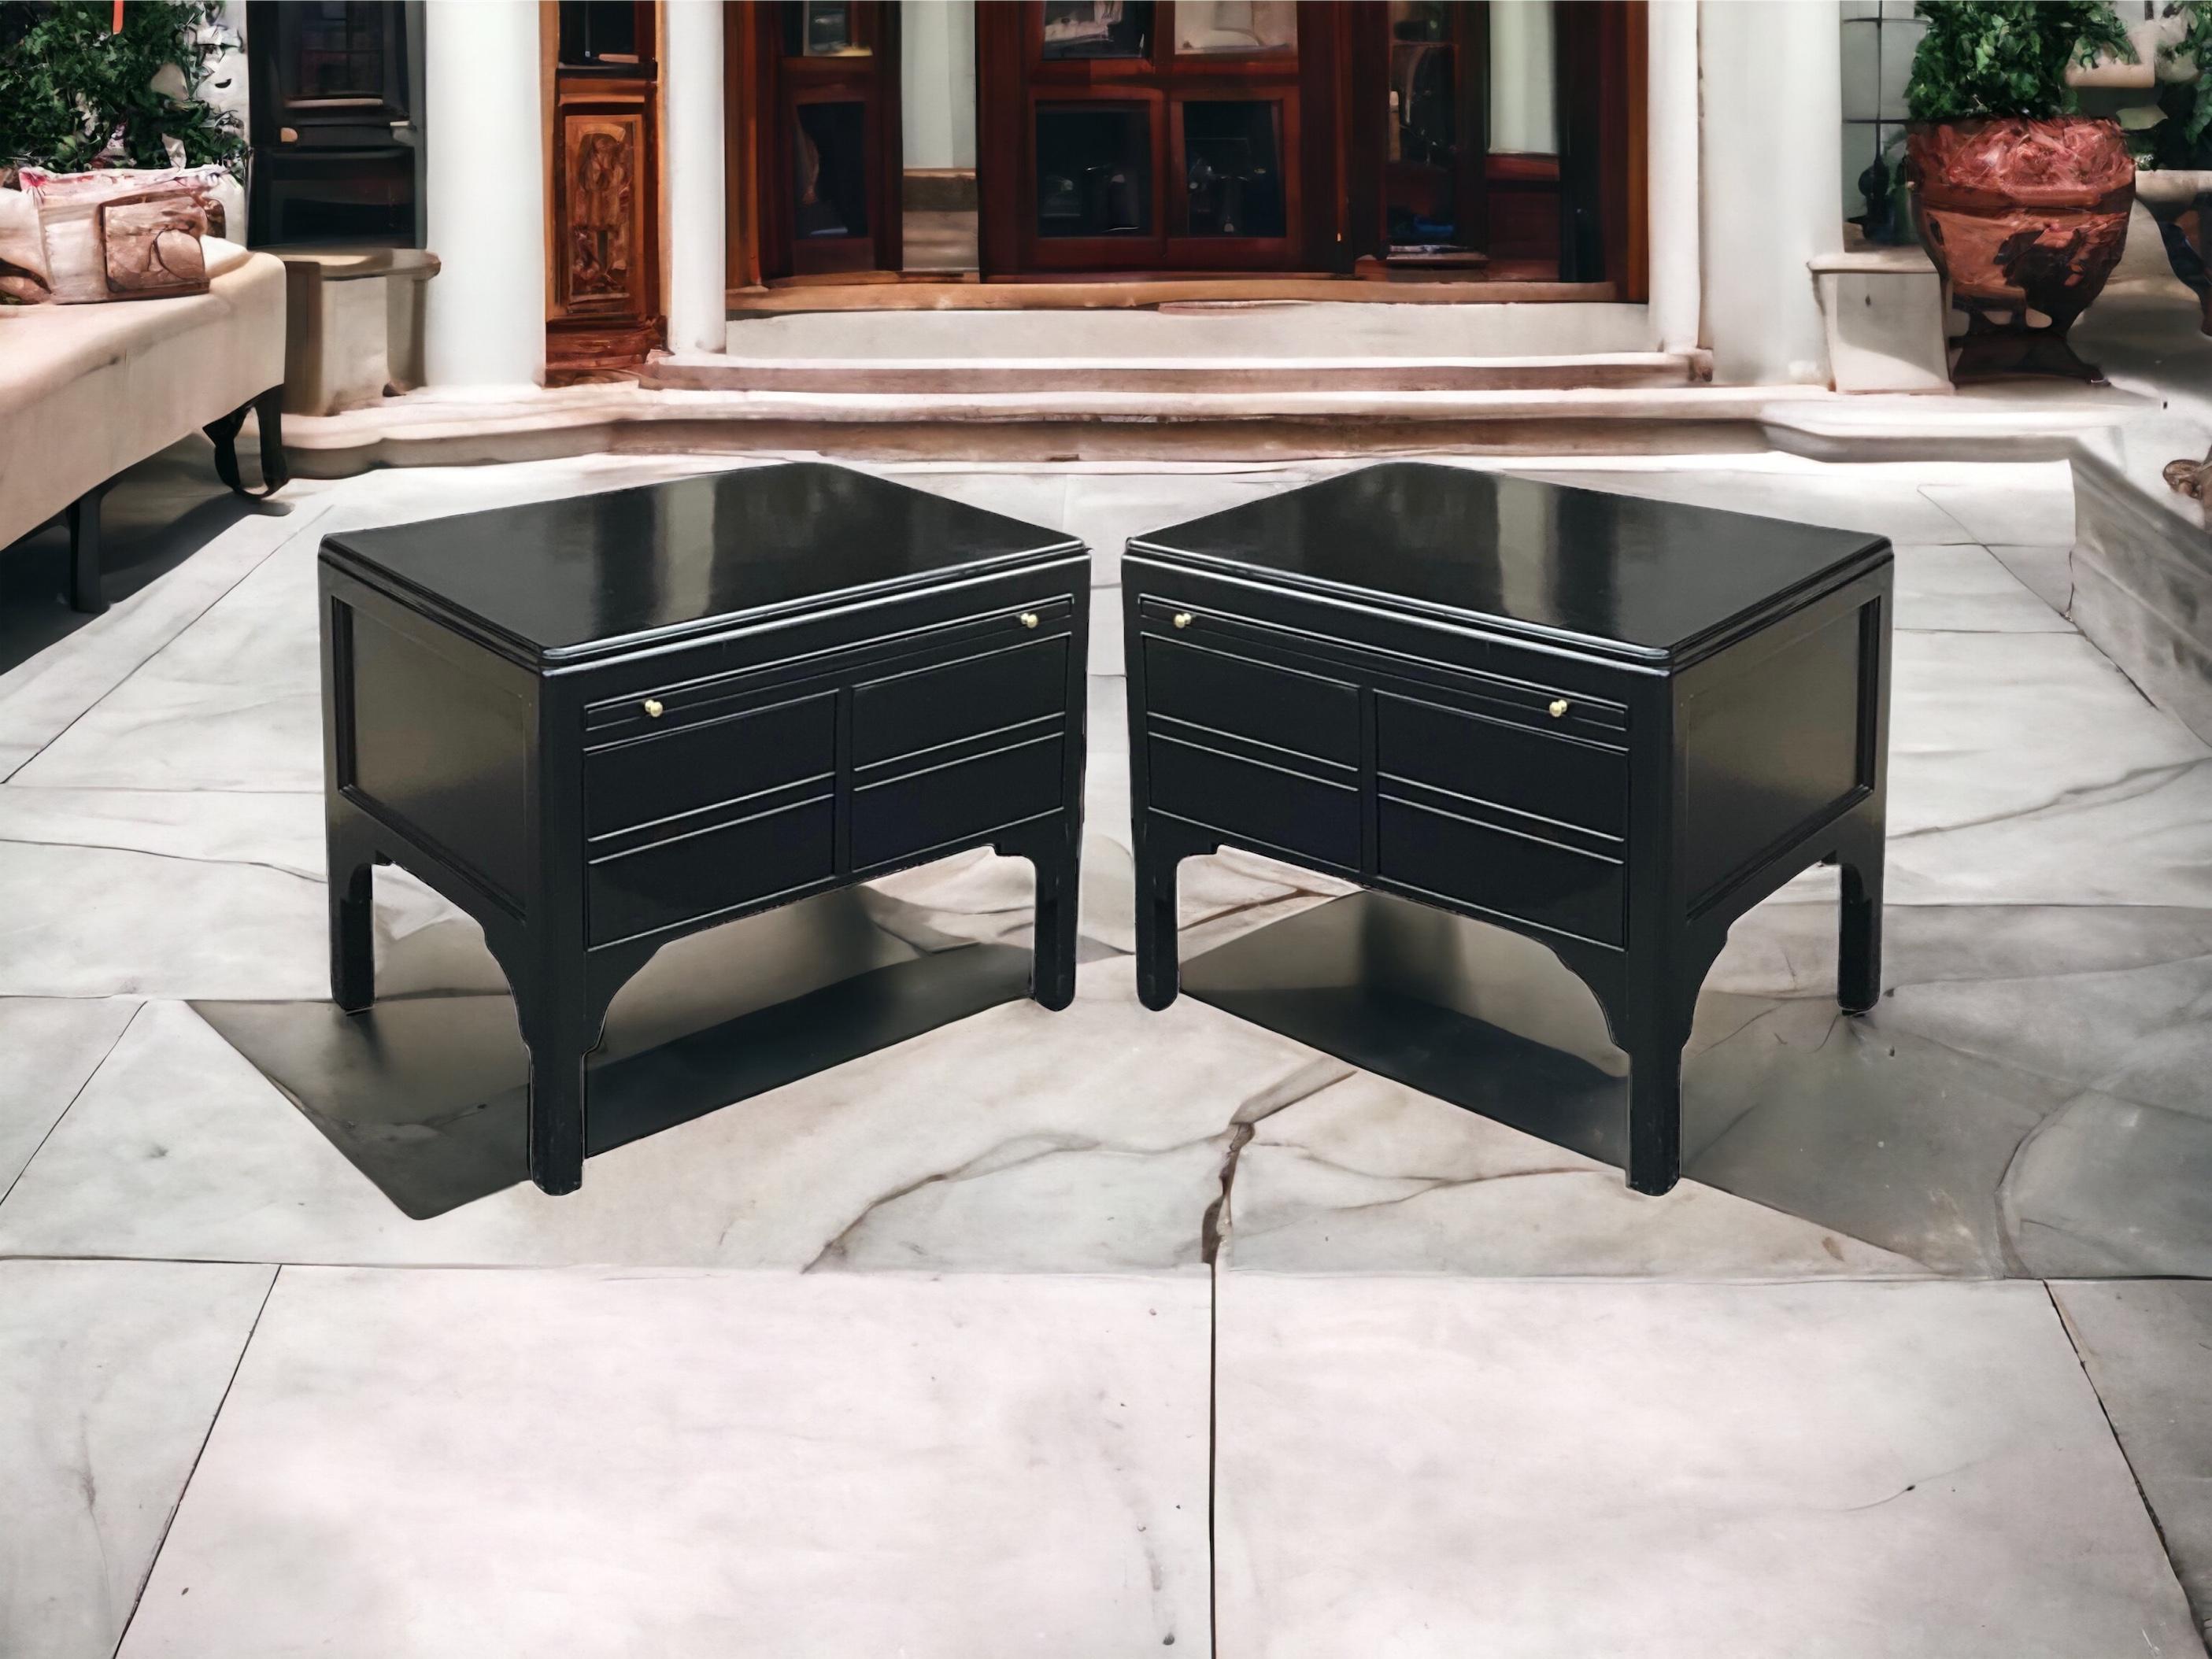 This is a pair of mid-century modern low profile black lacquer side tables or chests. Each has a draw leaf writing surface. The lacquer finish is vintage. They are unmarked and in very good condition. The addition of a little brass pull to match the